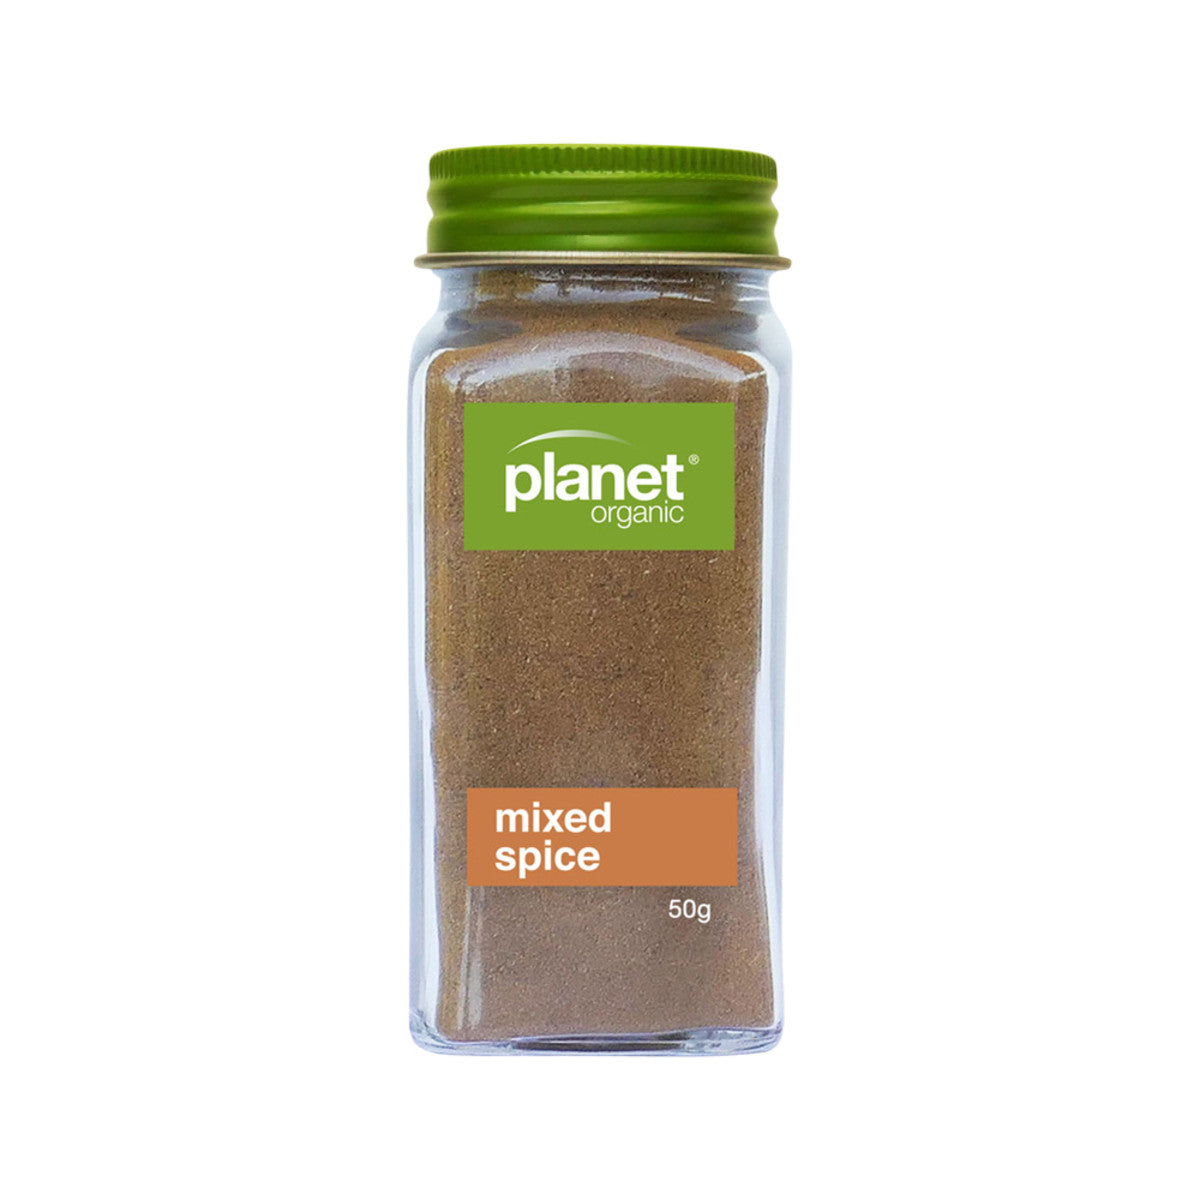 Planet Organic Mixed Spice Shaker 50g